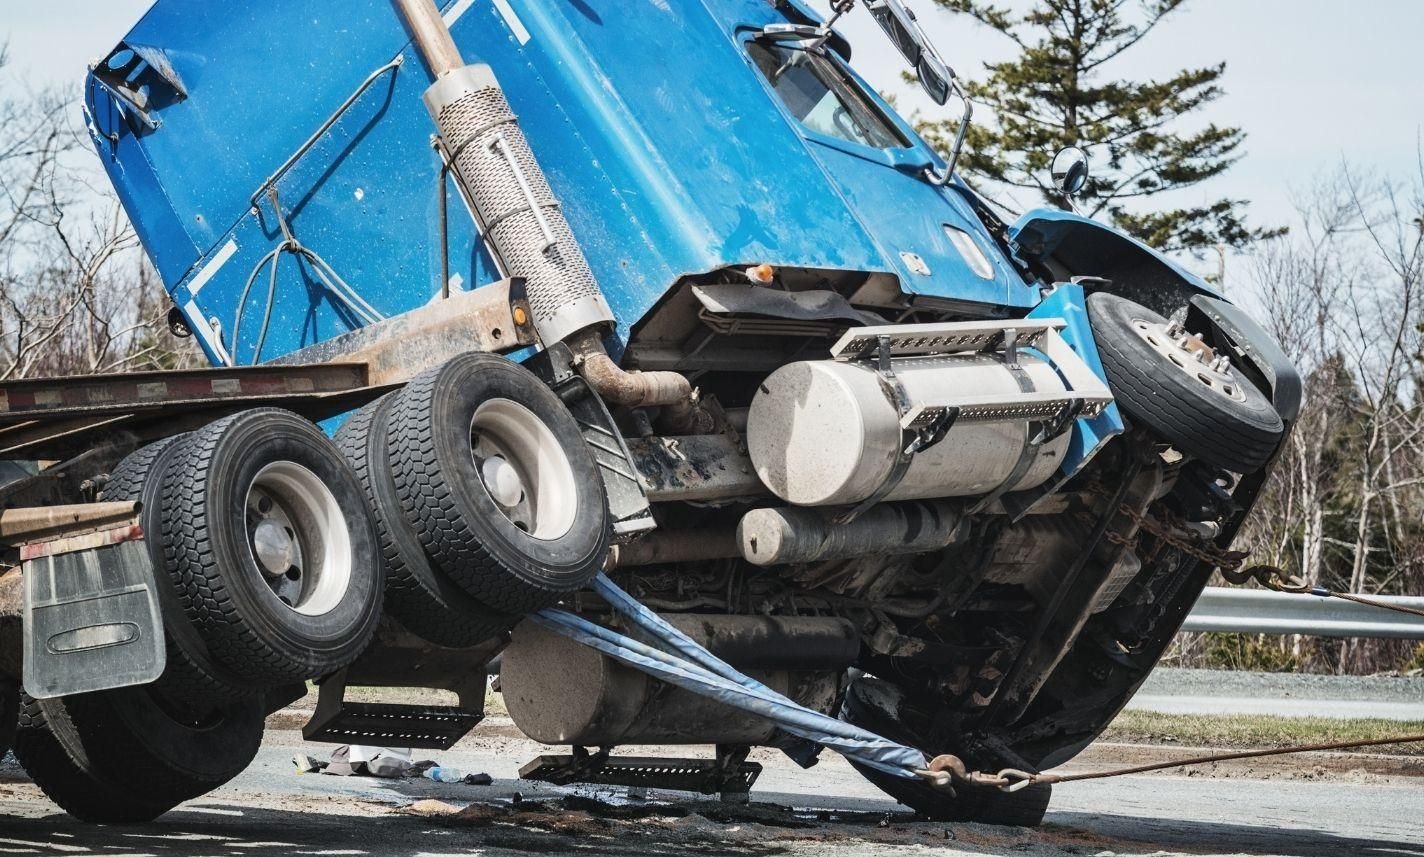 jenkinsburg-commercial-truck-accident-injury-lawyer